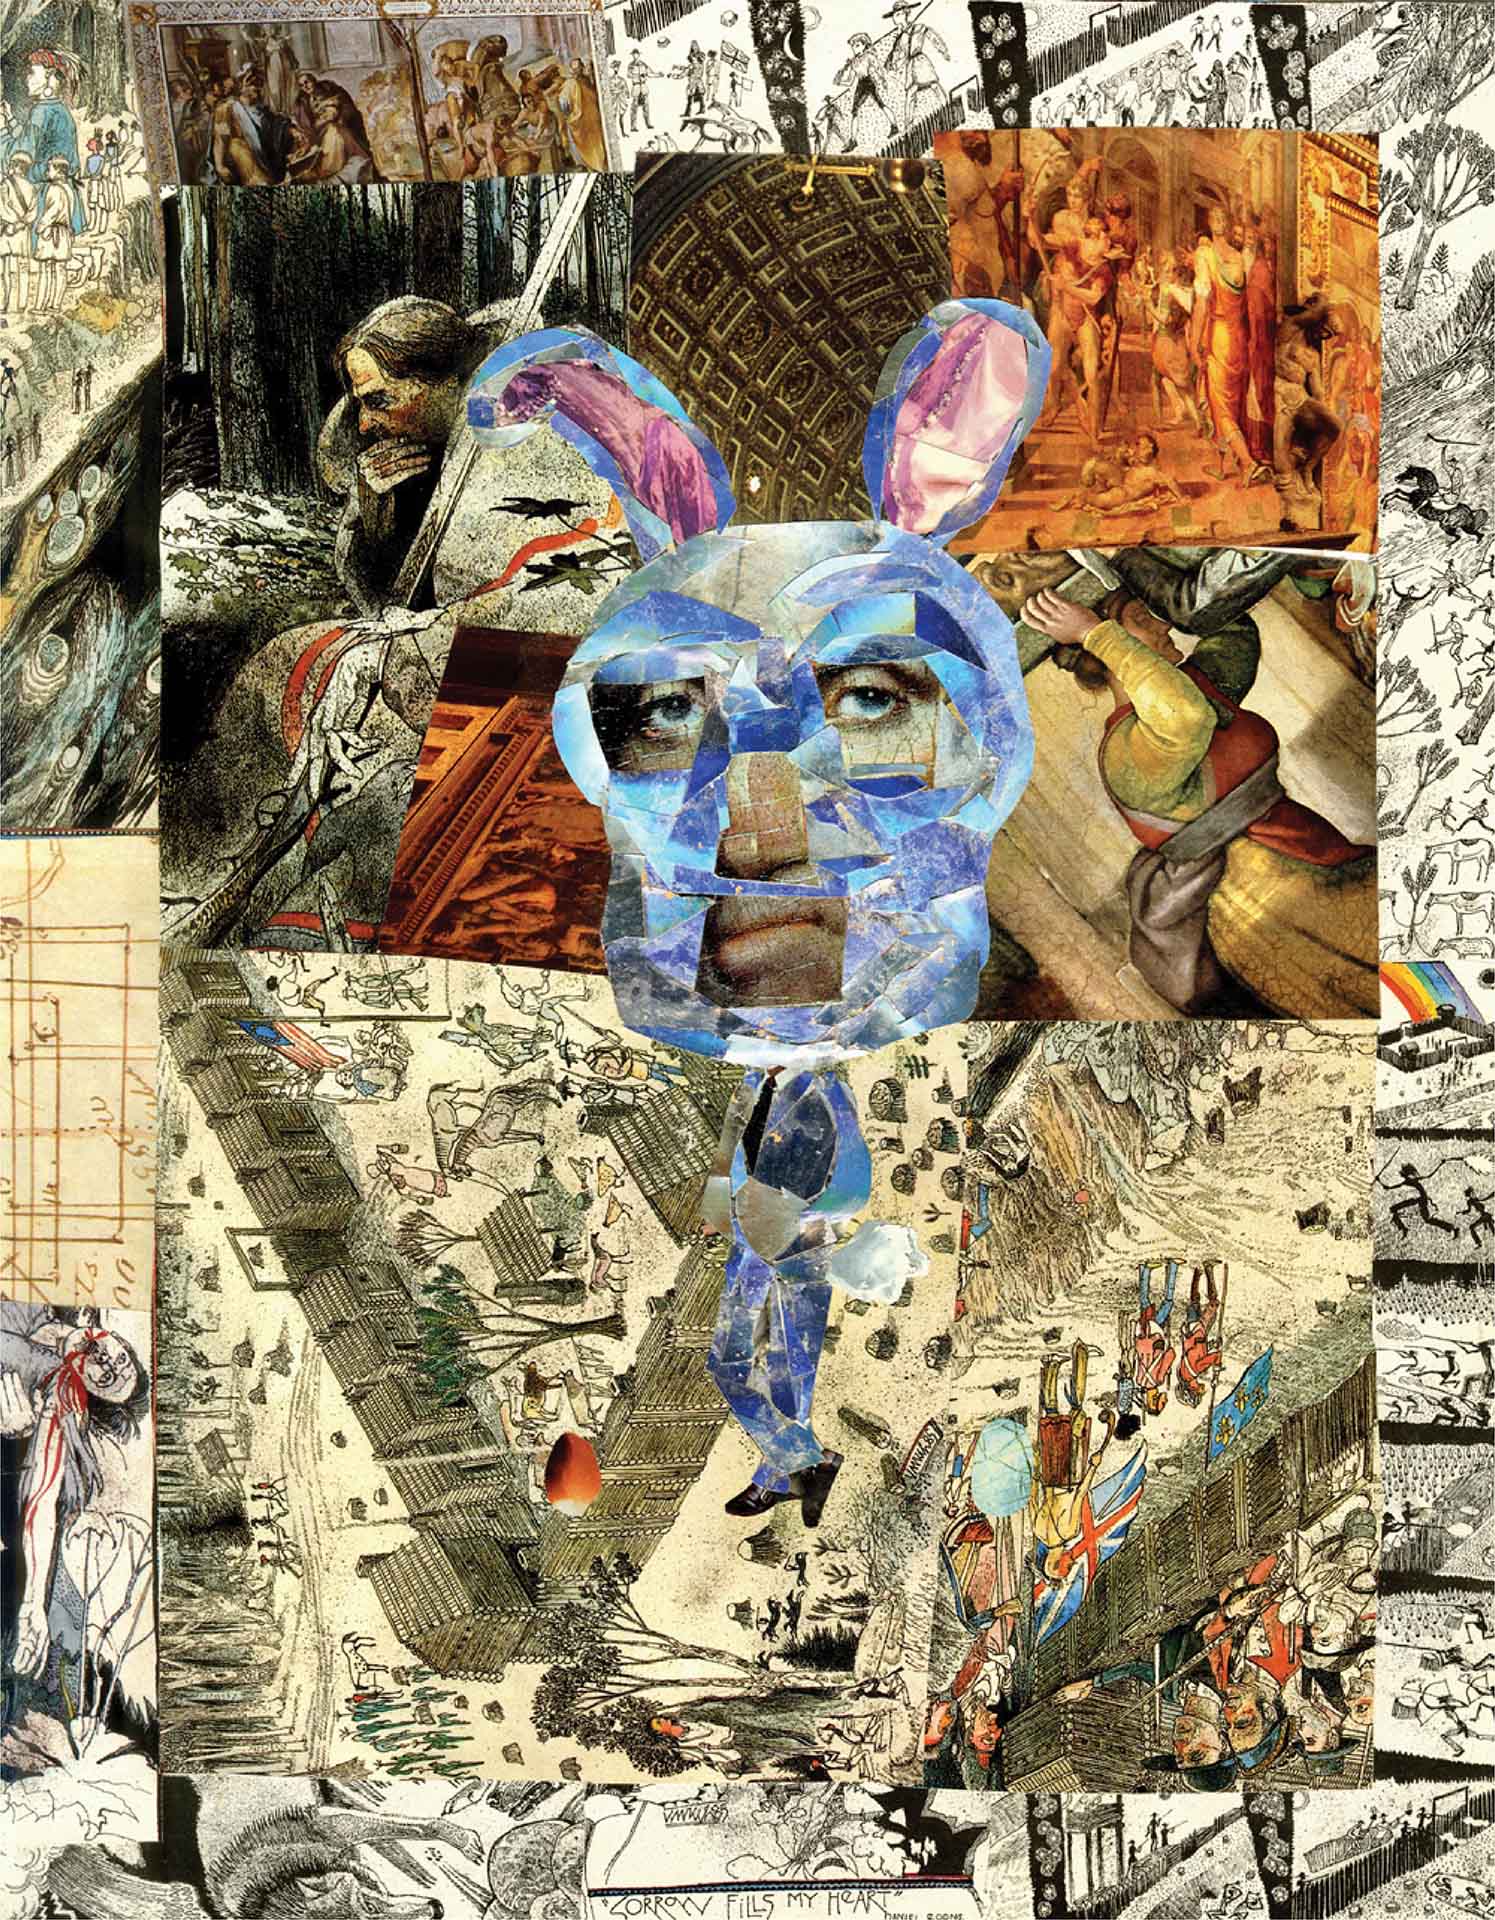 Collage styled artwork featuring a bunny-looking man in the middle of the collage with antique old art in the background.